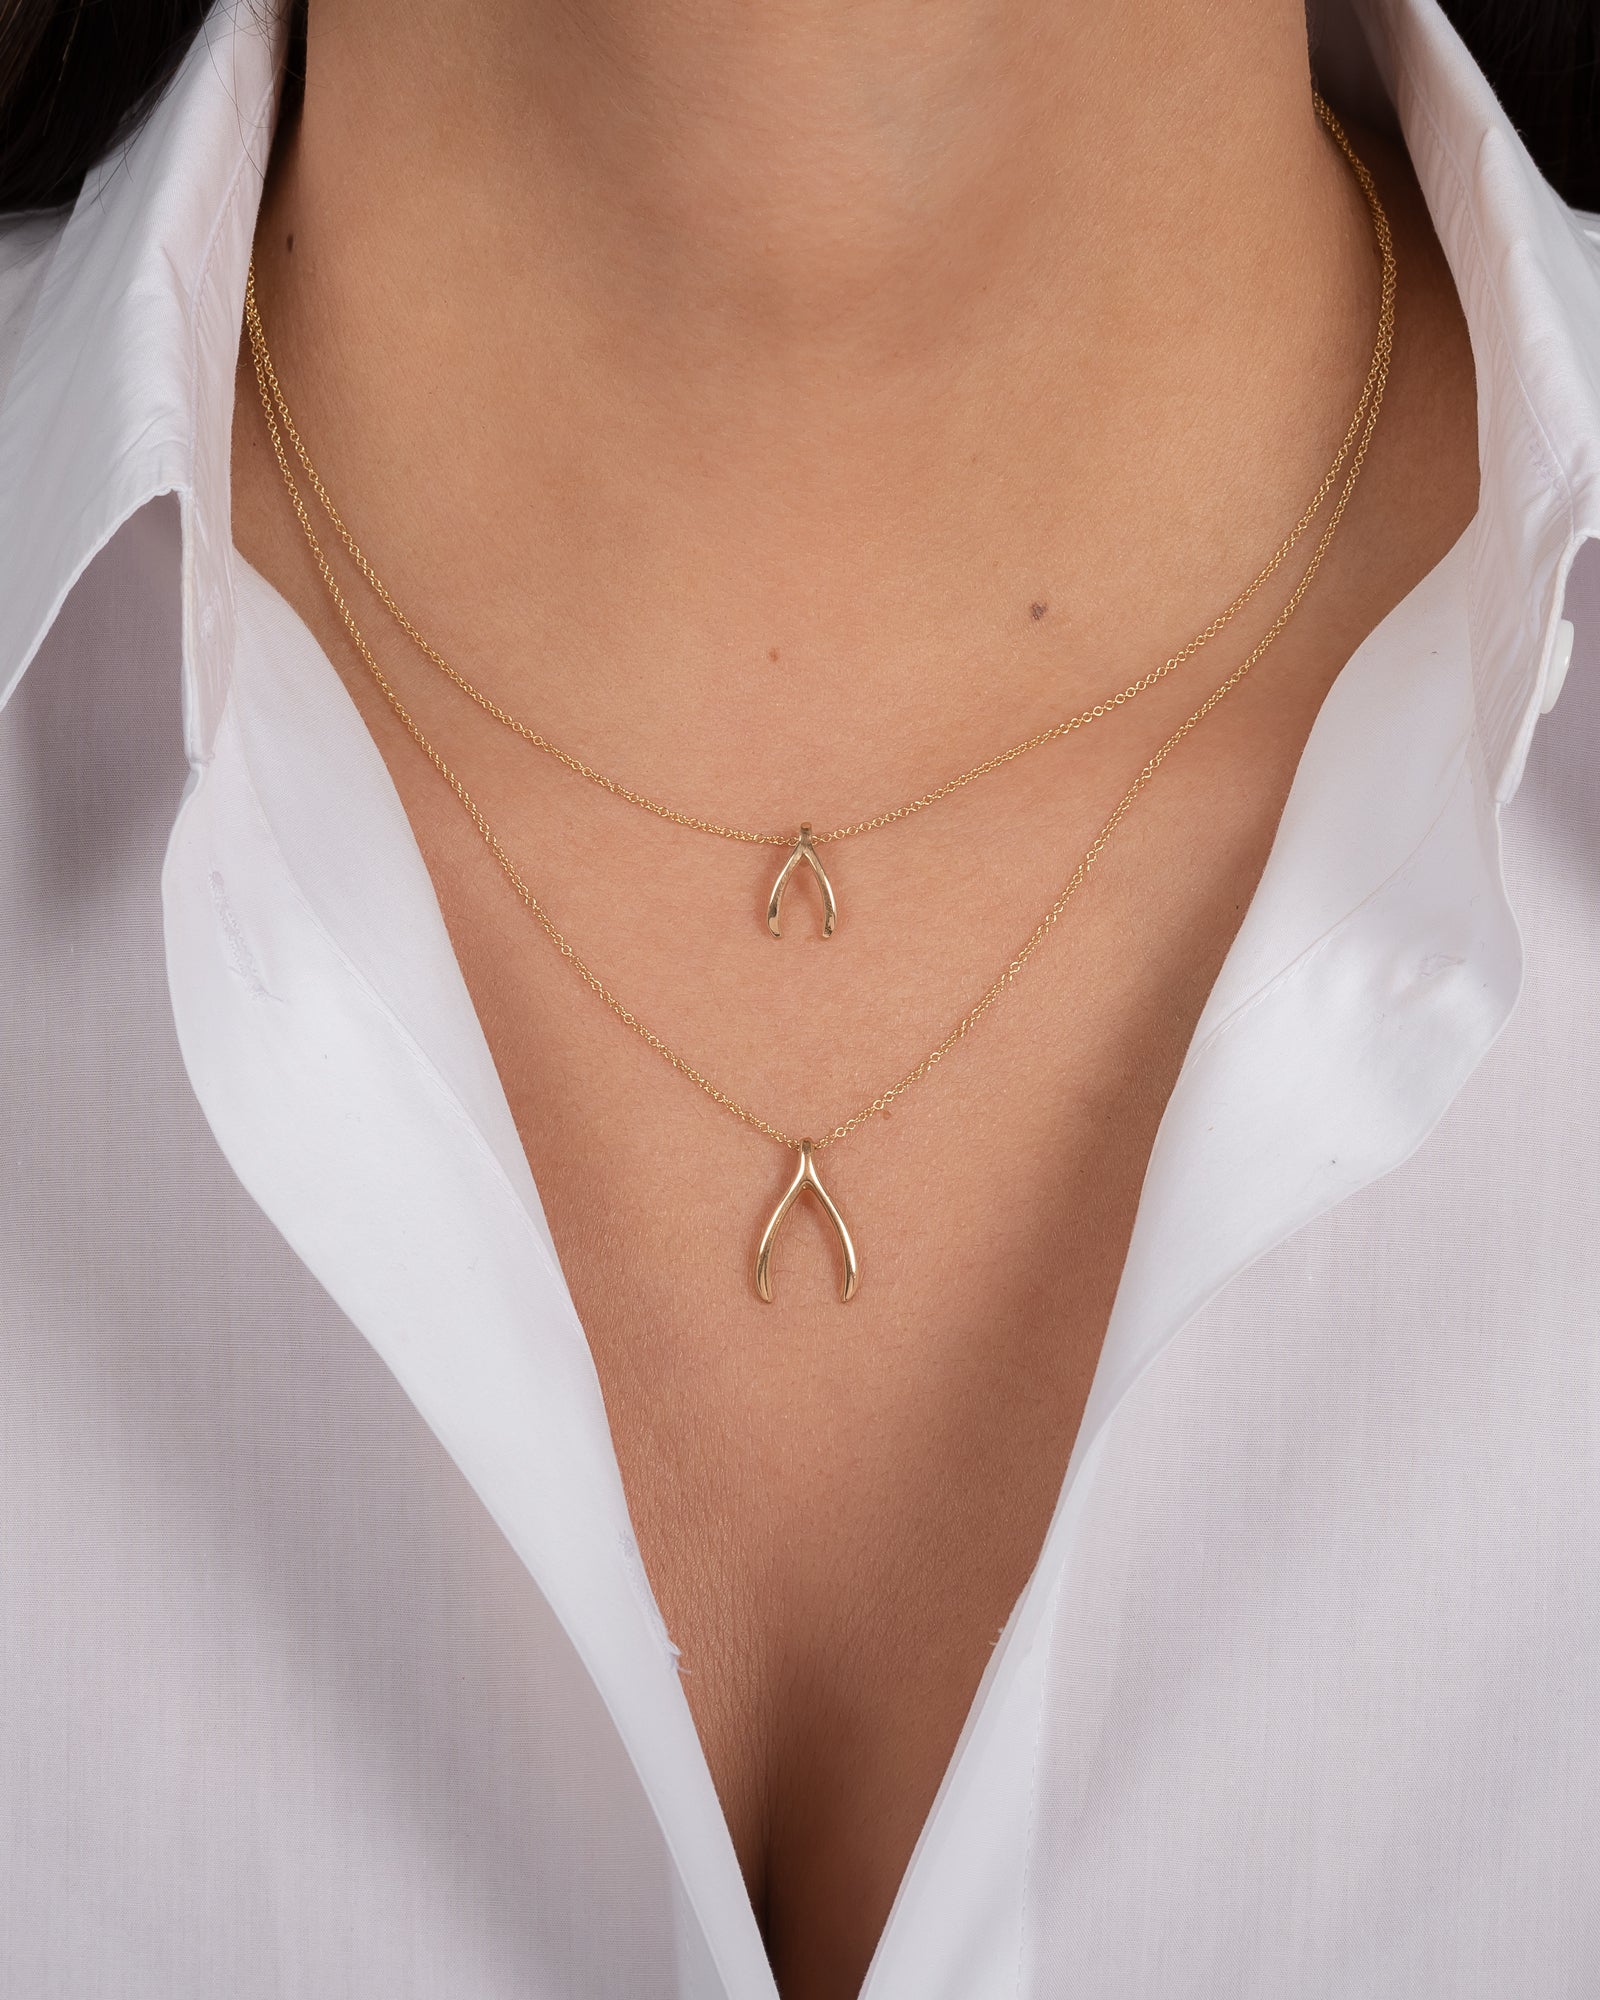 Buy Gold or Silver Wishbone Necklace Small Wishbone Necklace Boho Necklace  Minimalistic Necklace Dainty Wishbone Necklace Online in India - Etsy